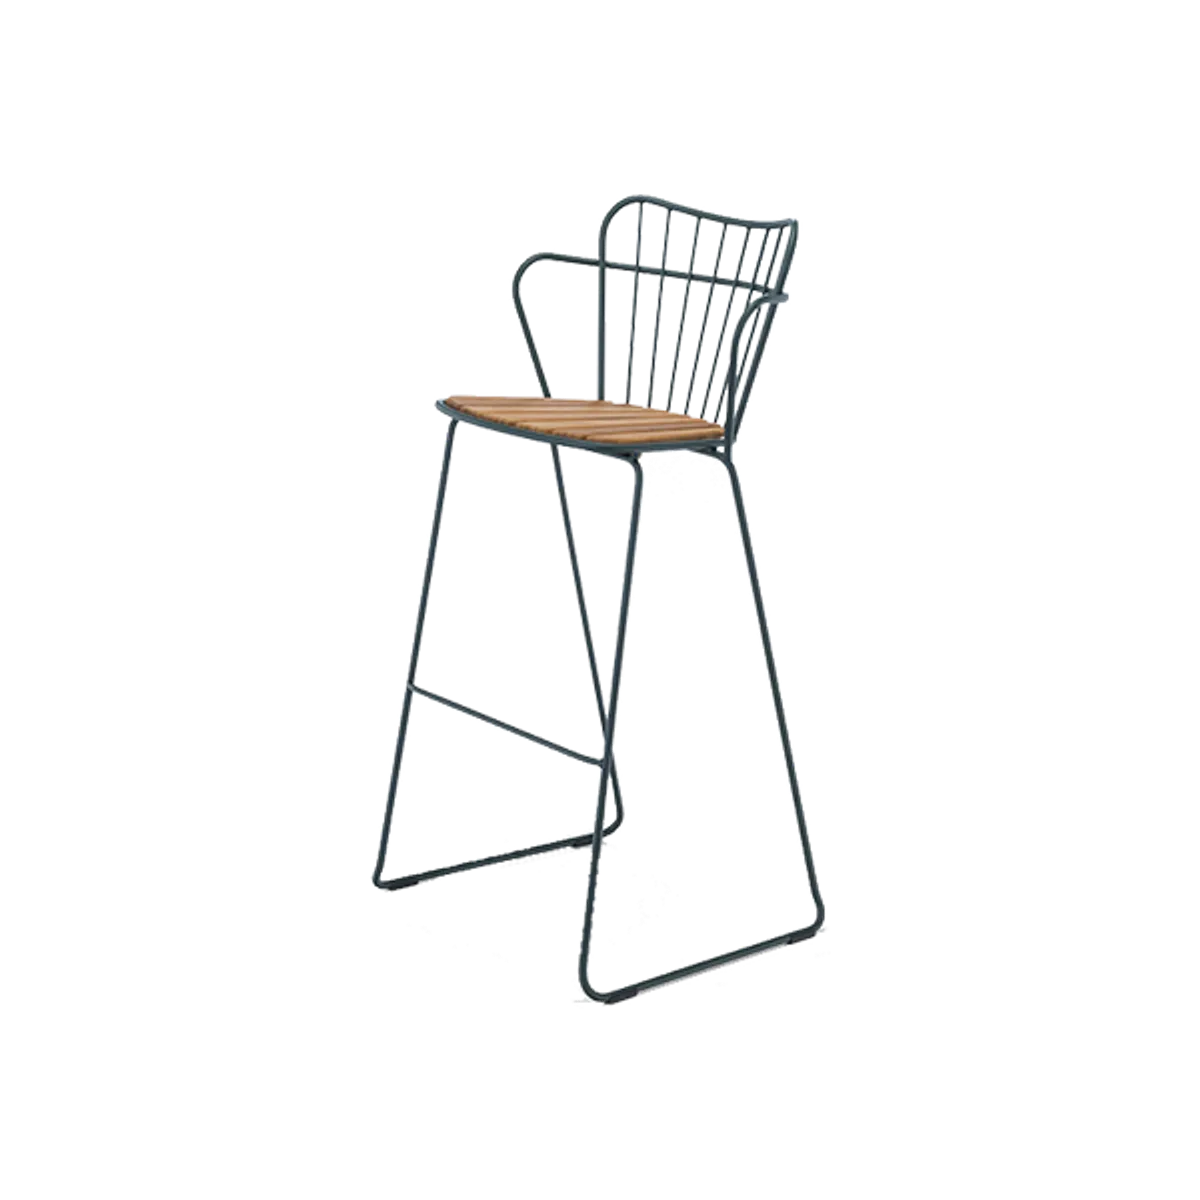 Web Plumage Bar Stool In Green Metal With Bamboo Seat Outdoor Furniture For Bars